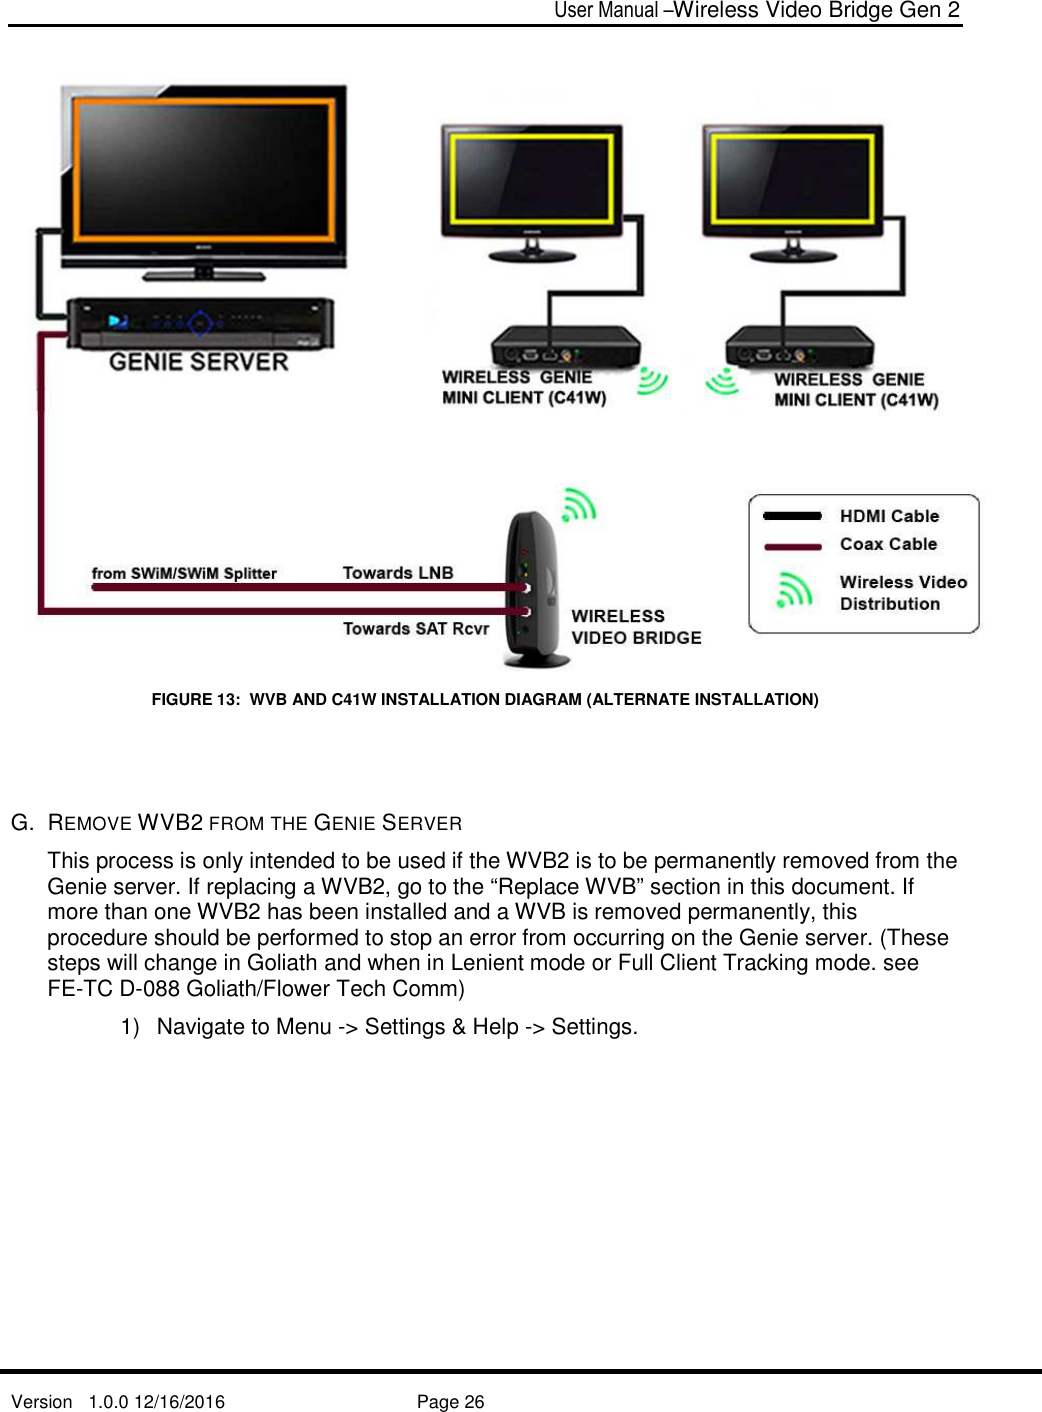  User Manual –Wireless Video Bridge Gen 2  Version   1.0.0 12/16/2016     Page 26    FIGURE 13:  WVB AND C41W INSTALLATION DIAGRAM (ALTERNATE INSTALLATION)   G.  REMOVE WVB2 FROM THE GENIE SERVER This process is only intended to be used if the WVB2 is to be permanently removed from the Genie server. If replacing a WVB2, go to the “Replace WVB” section in this document. If more than one WVB2 has been installed and a WVB is removed permanently, this procedure should be performed to stop an error from occurring on the Genie server. (These steps will change in Goliath and when in Lenient mode or Full Client Tracking mode. see FE-TC D-088 Goliath/Flower Tech Comm) 1)  Navigate to Menu -&gt; Settings &amp; Help -&gt; Settings. 